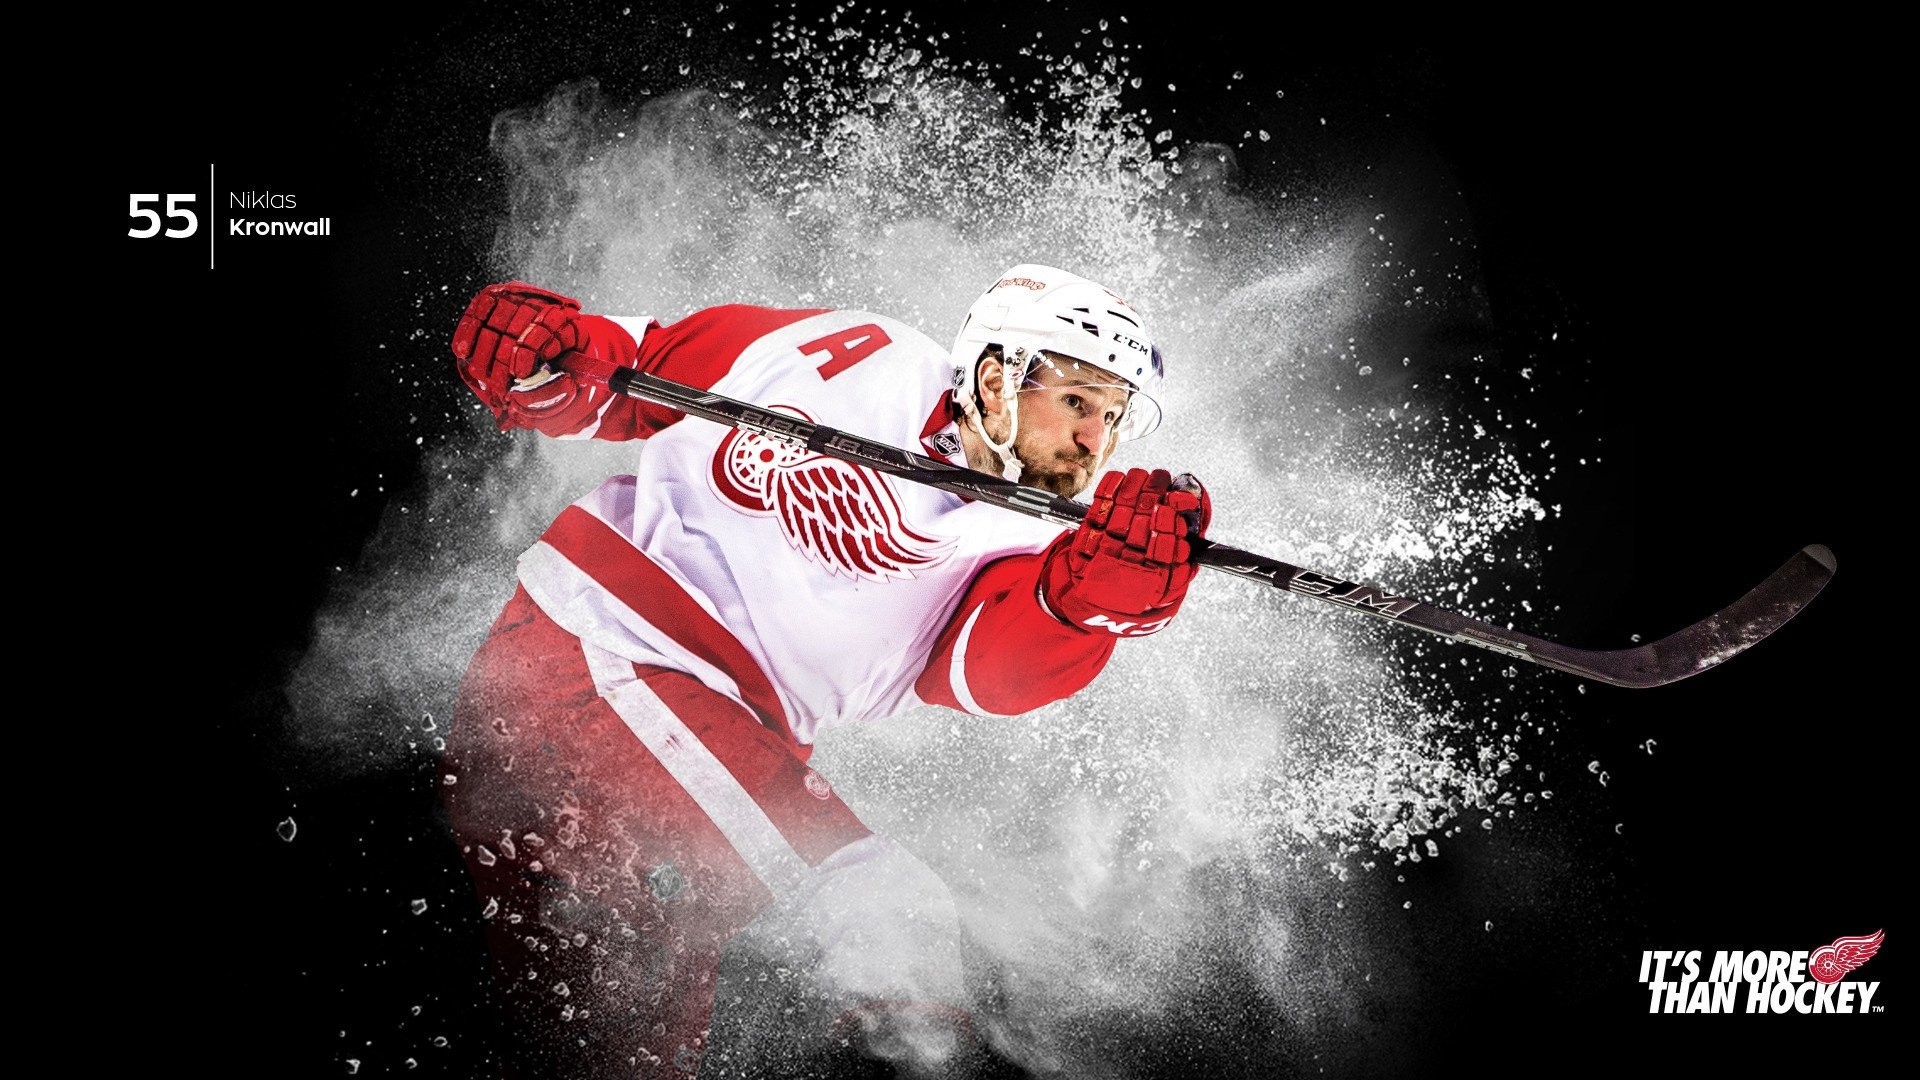 Detroit Red Wings: Niklas Kronwall, Scotty Bowman was hired as the head coach in 1993. 1920x1080 Full HD Background.